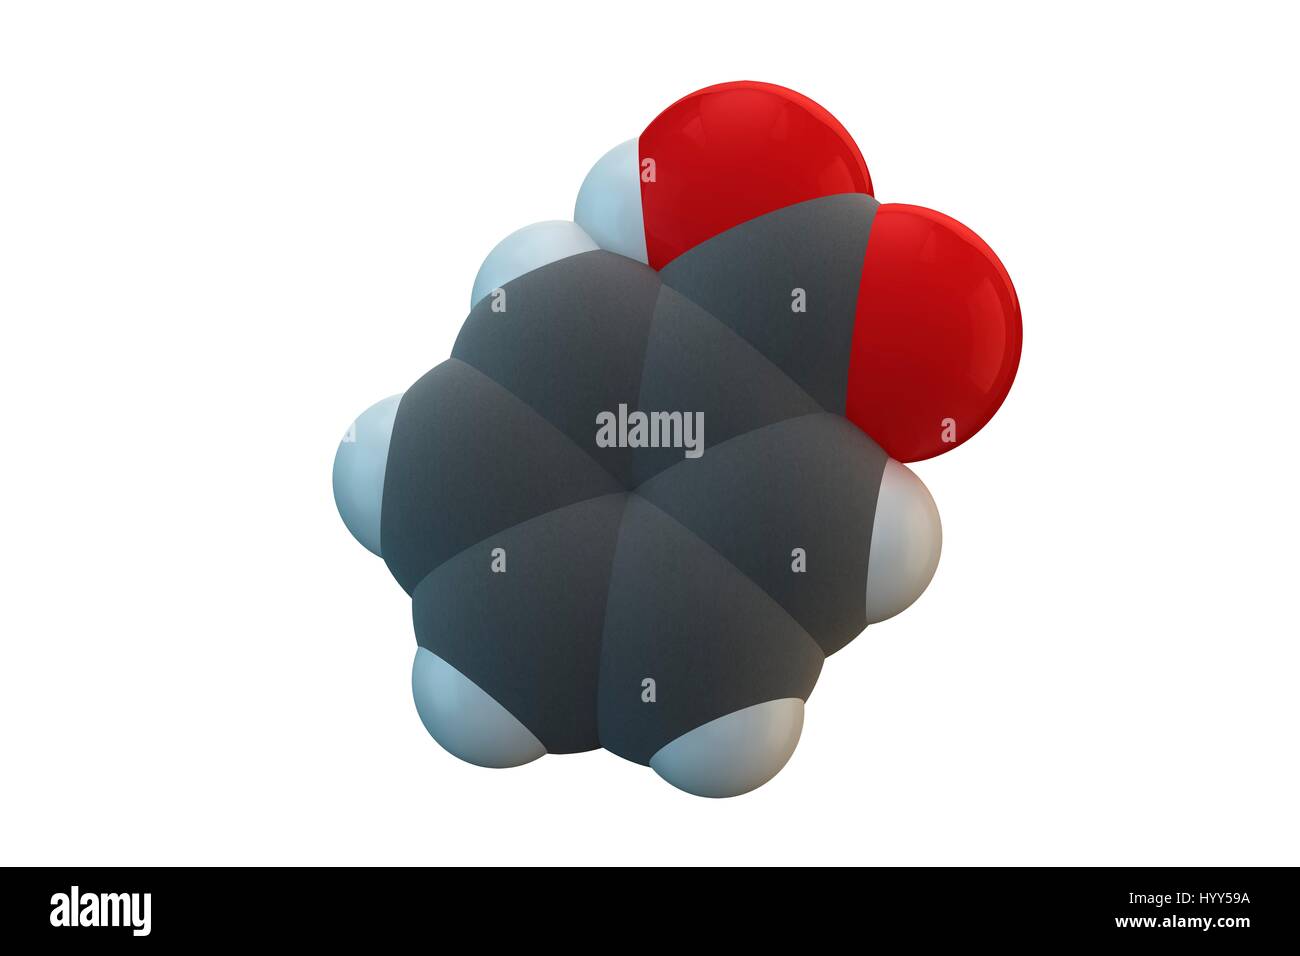 Benzoic acid molecule. Benzoate salts are used as food preservatives. Chemical formula is C7H6O2. Atoms are represented as spheres: carbon (grey), hydrogen (white), oxygen (red). Illustration. Stock Photo